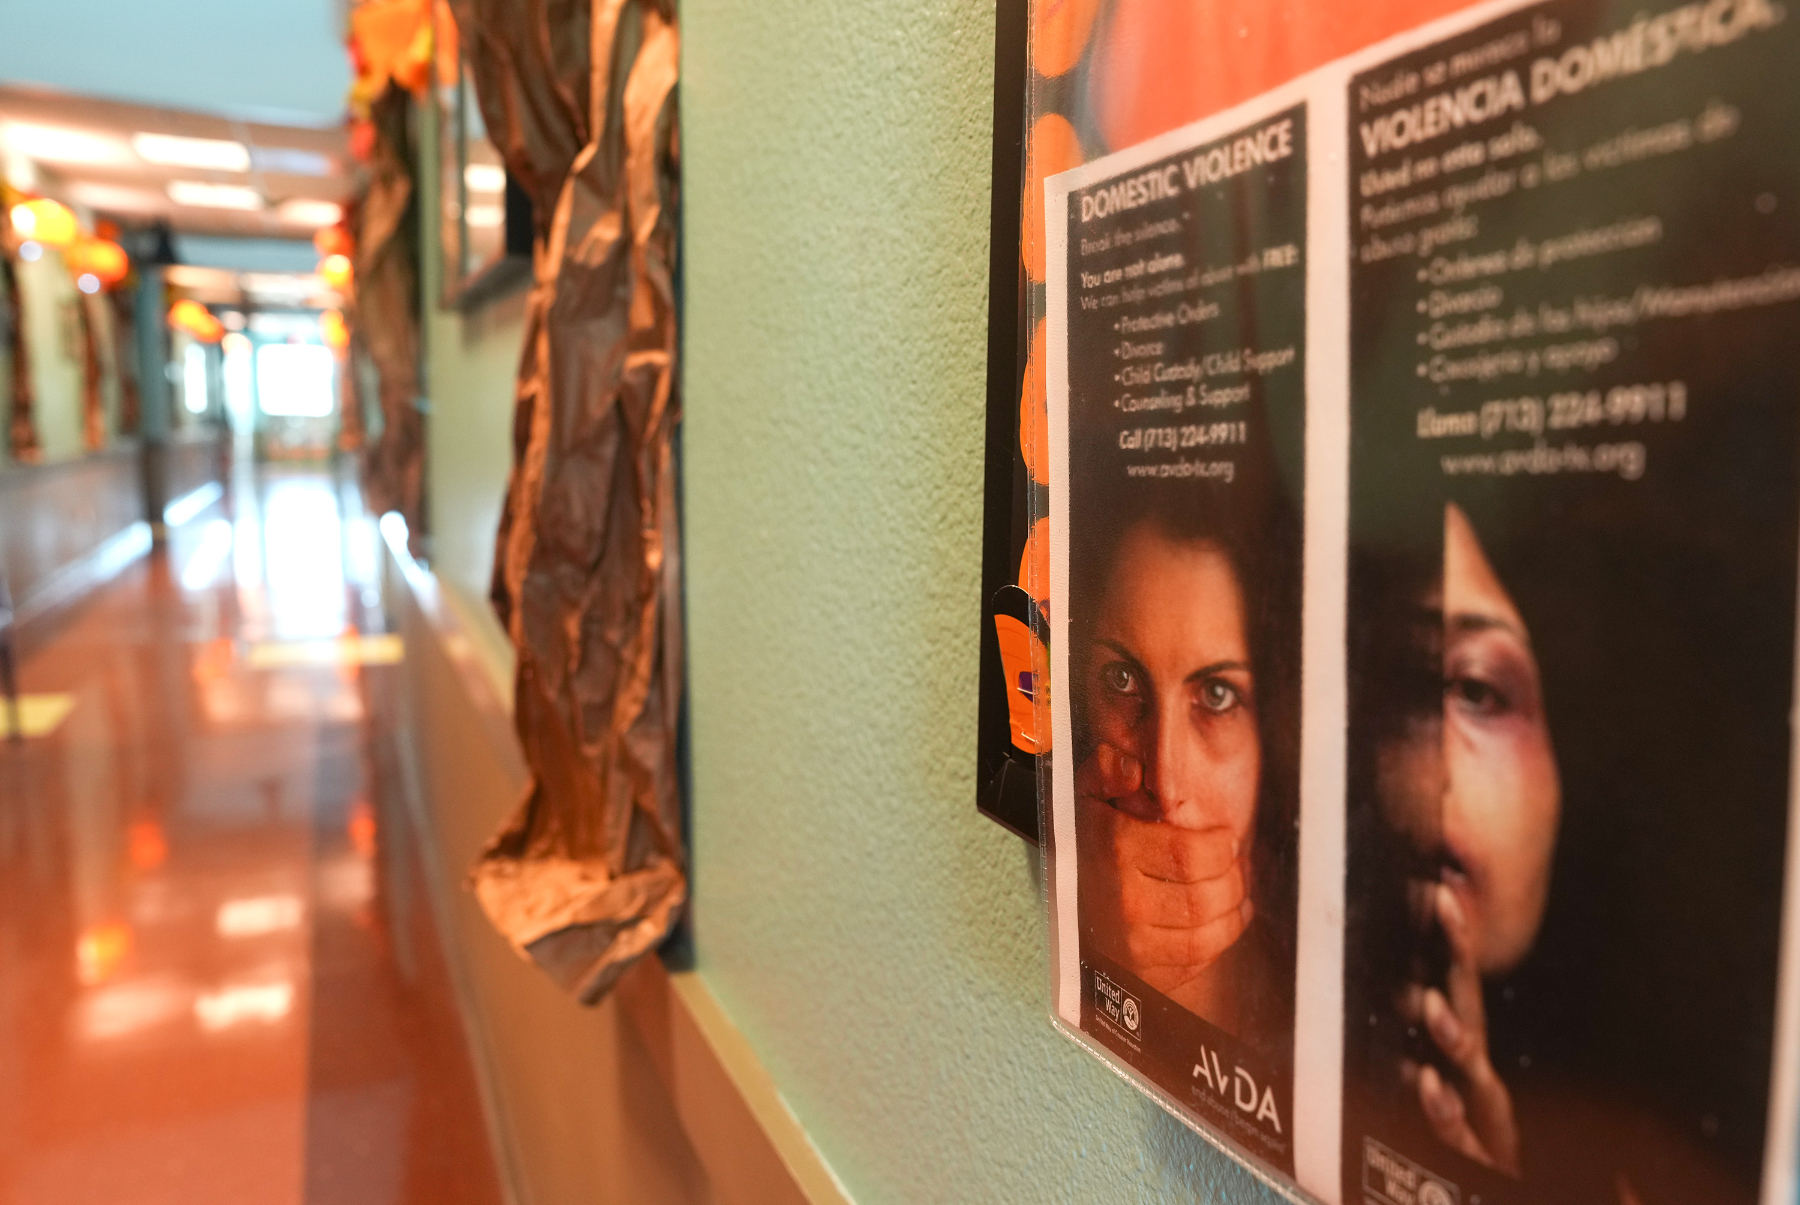 Posters about domestic violence in a hallway at a campus in Houston